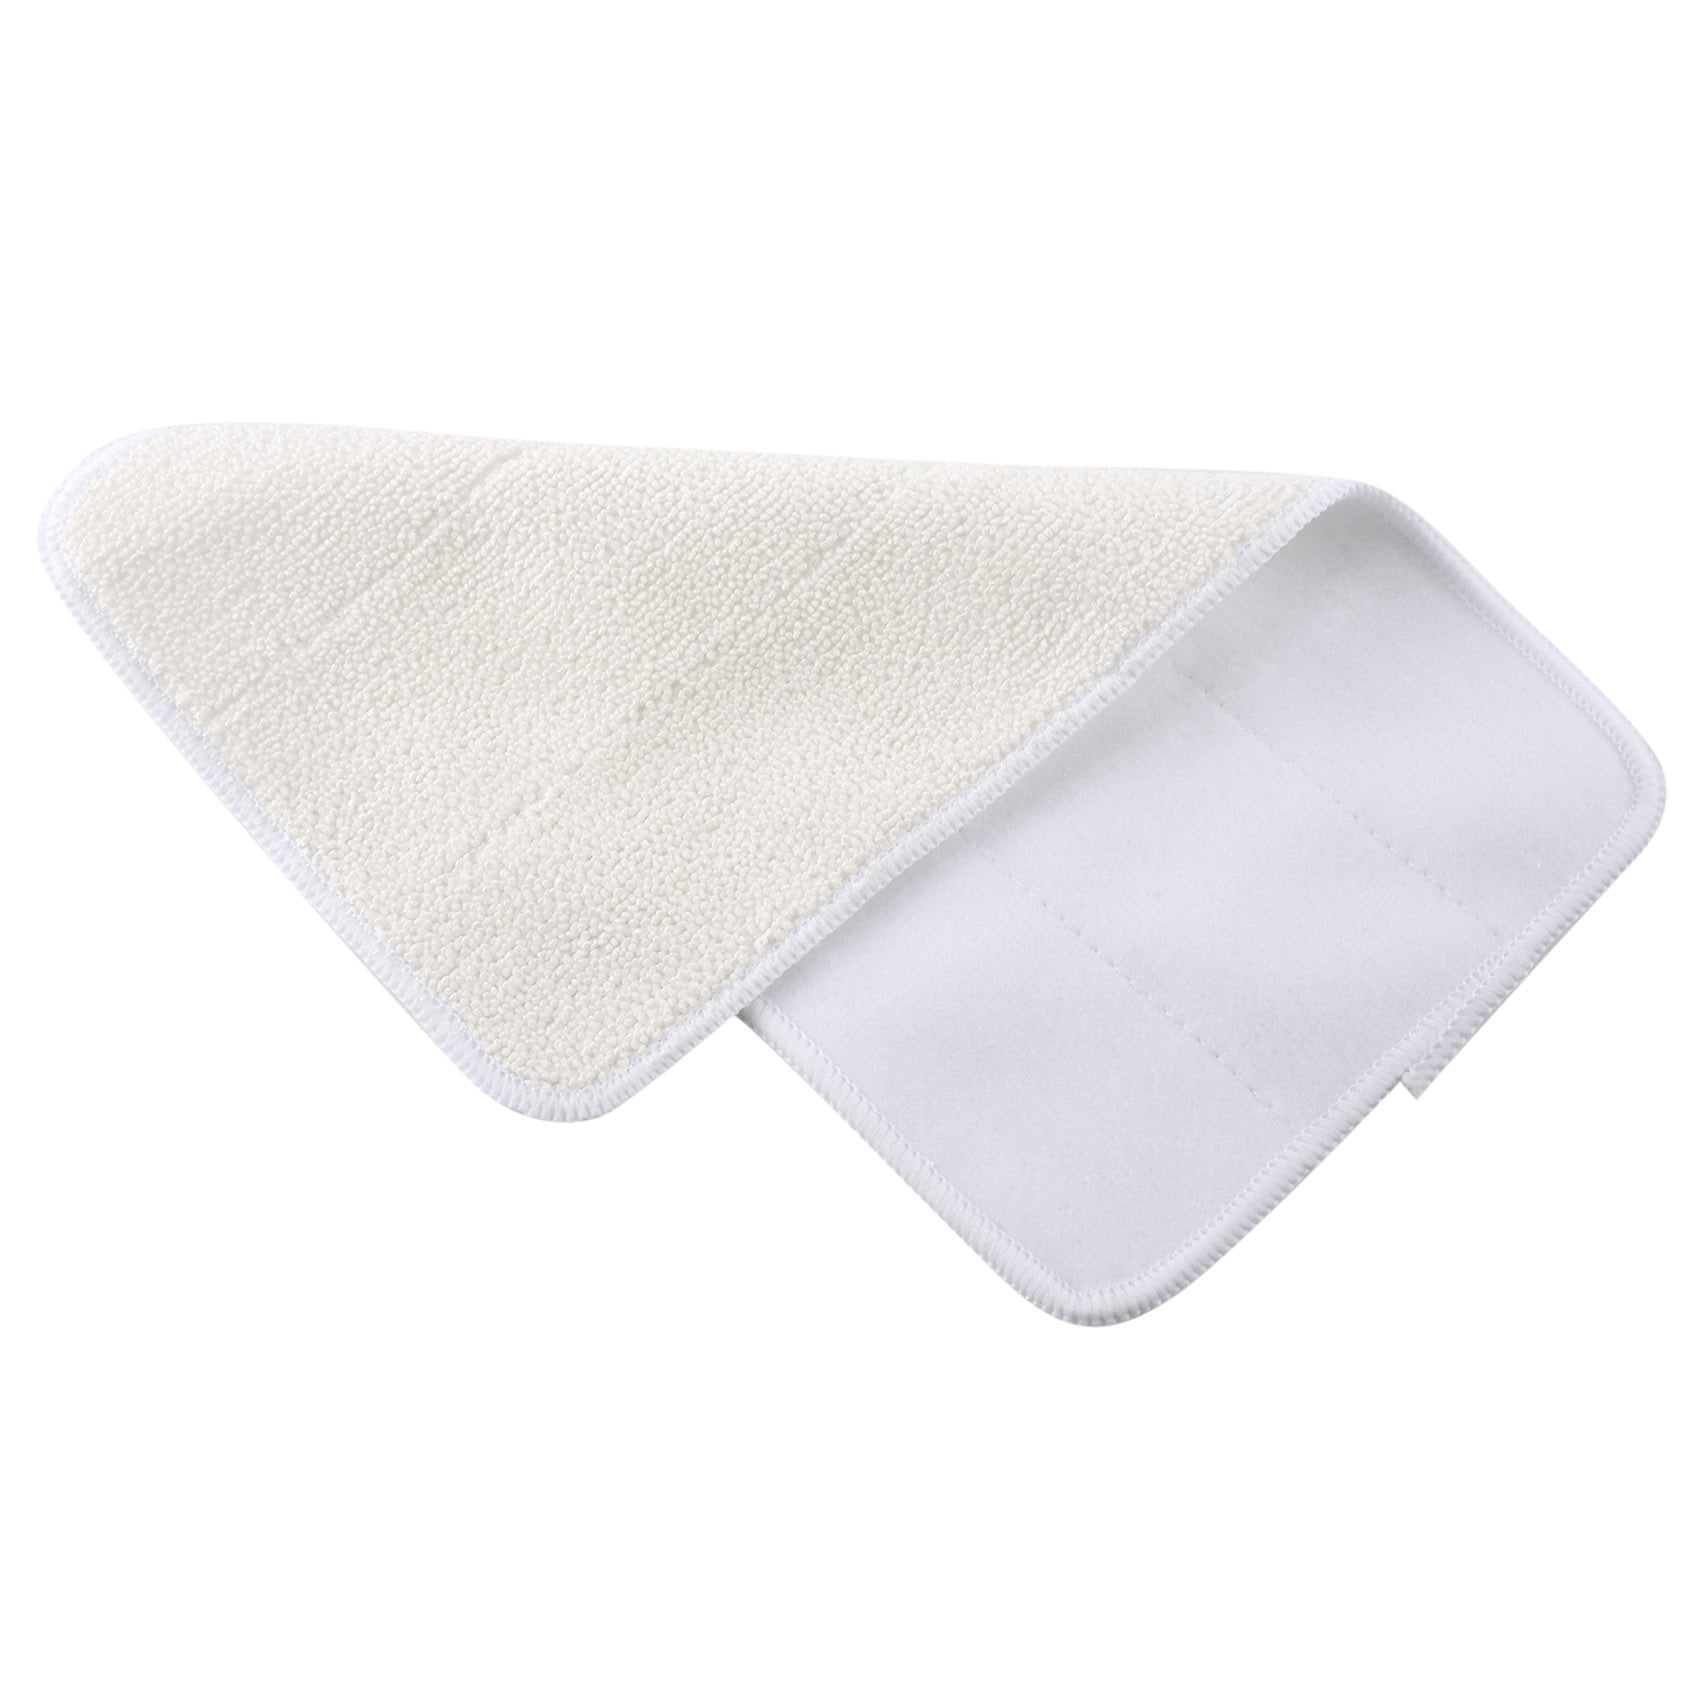 Ieegkit 2 Pcs Cleaning Mop Cloths Replacement for Deerma ZQ610 